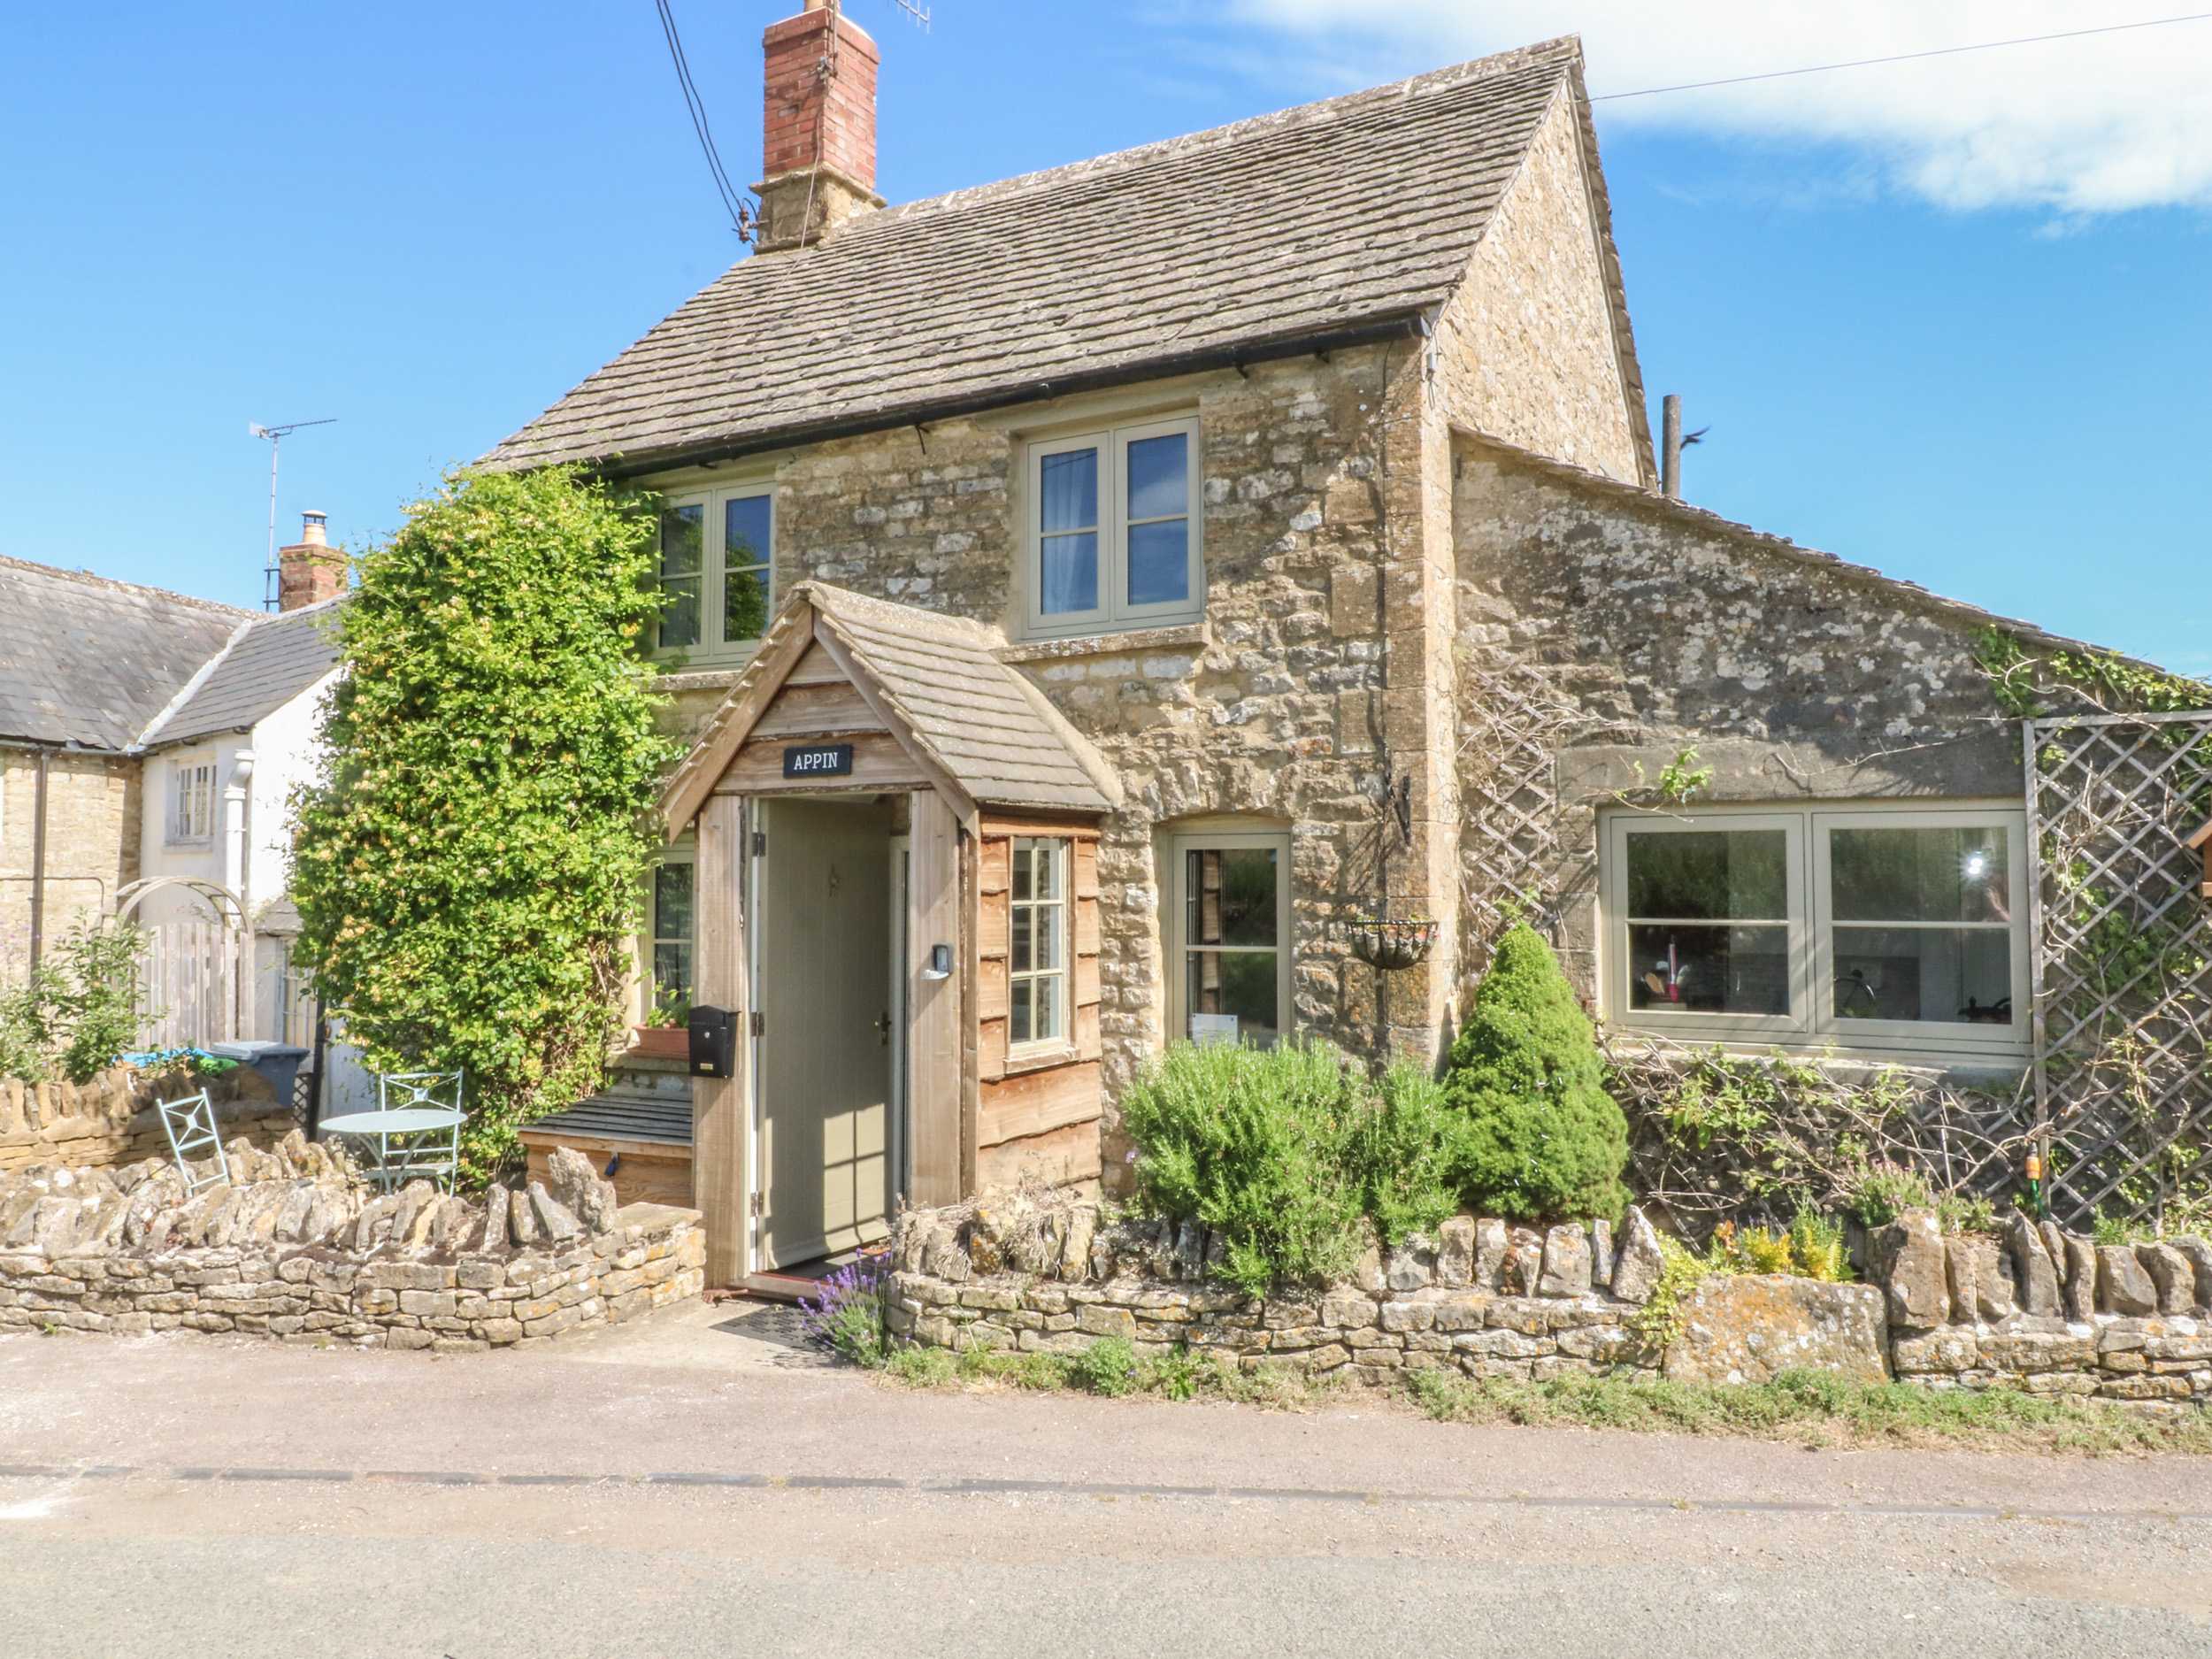 1 bedroom Cottage for rent in Chipping Norton